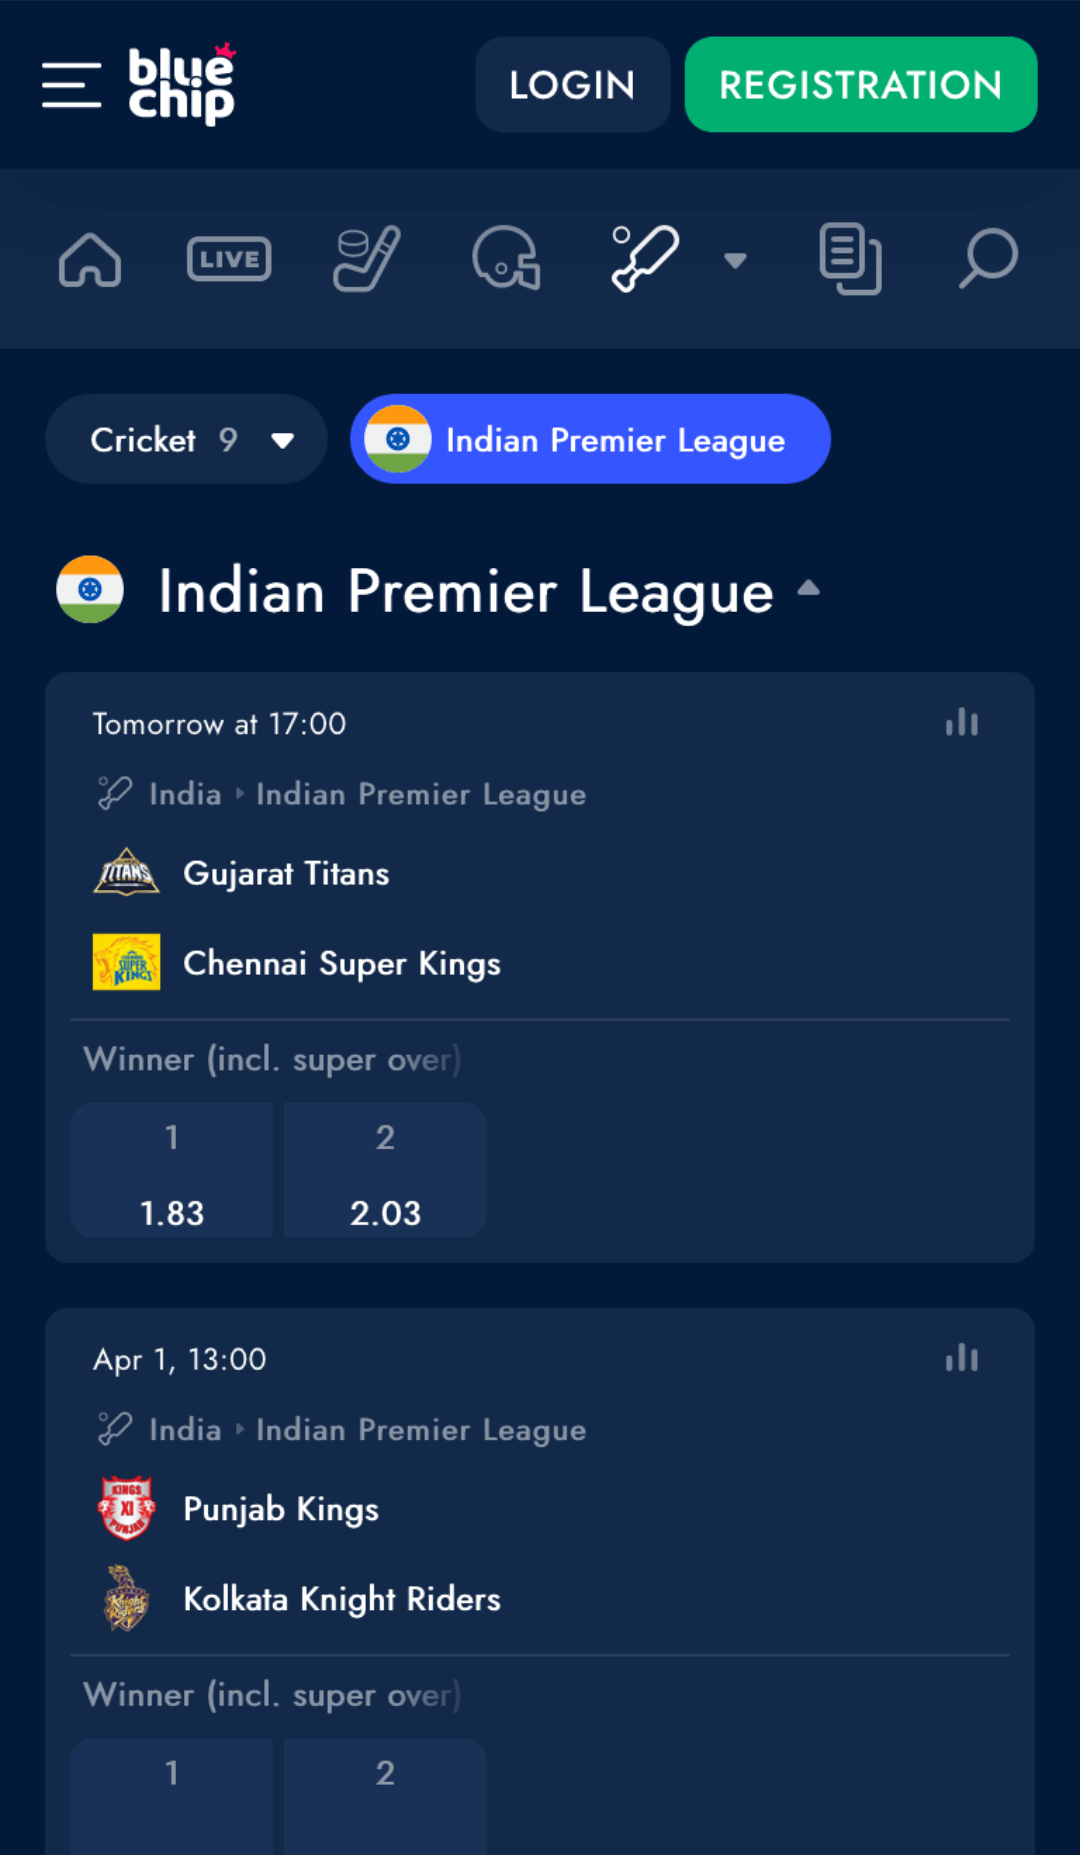 In the Bluechip mobile app, you can bet on the IPL